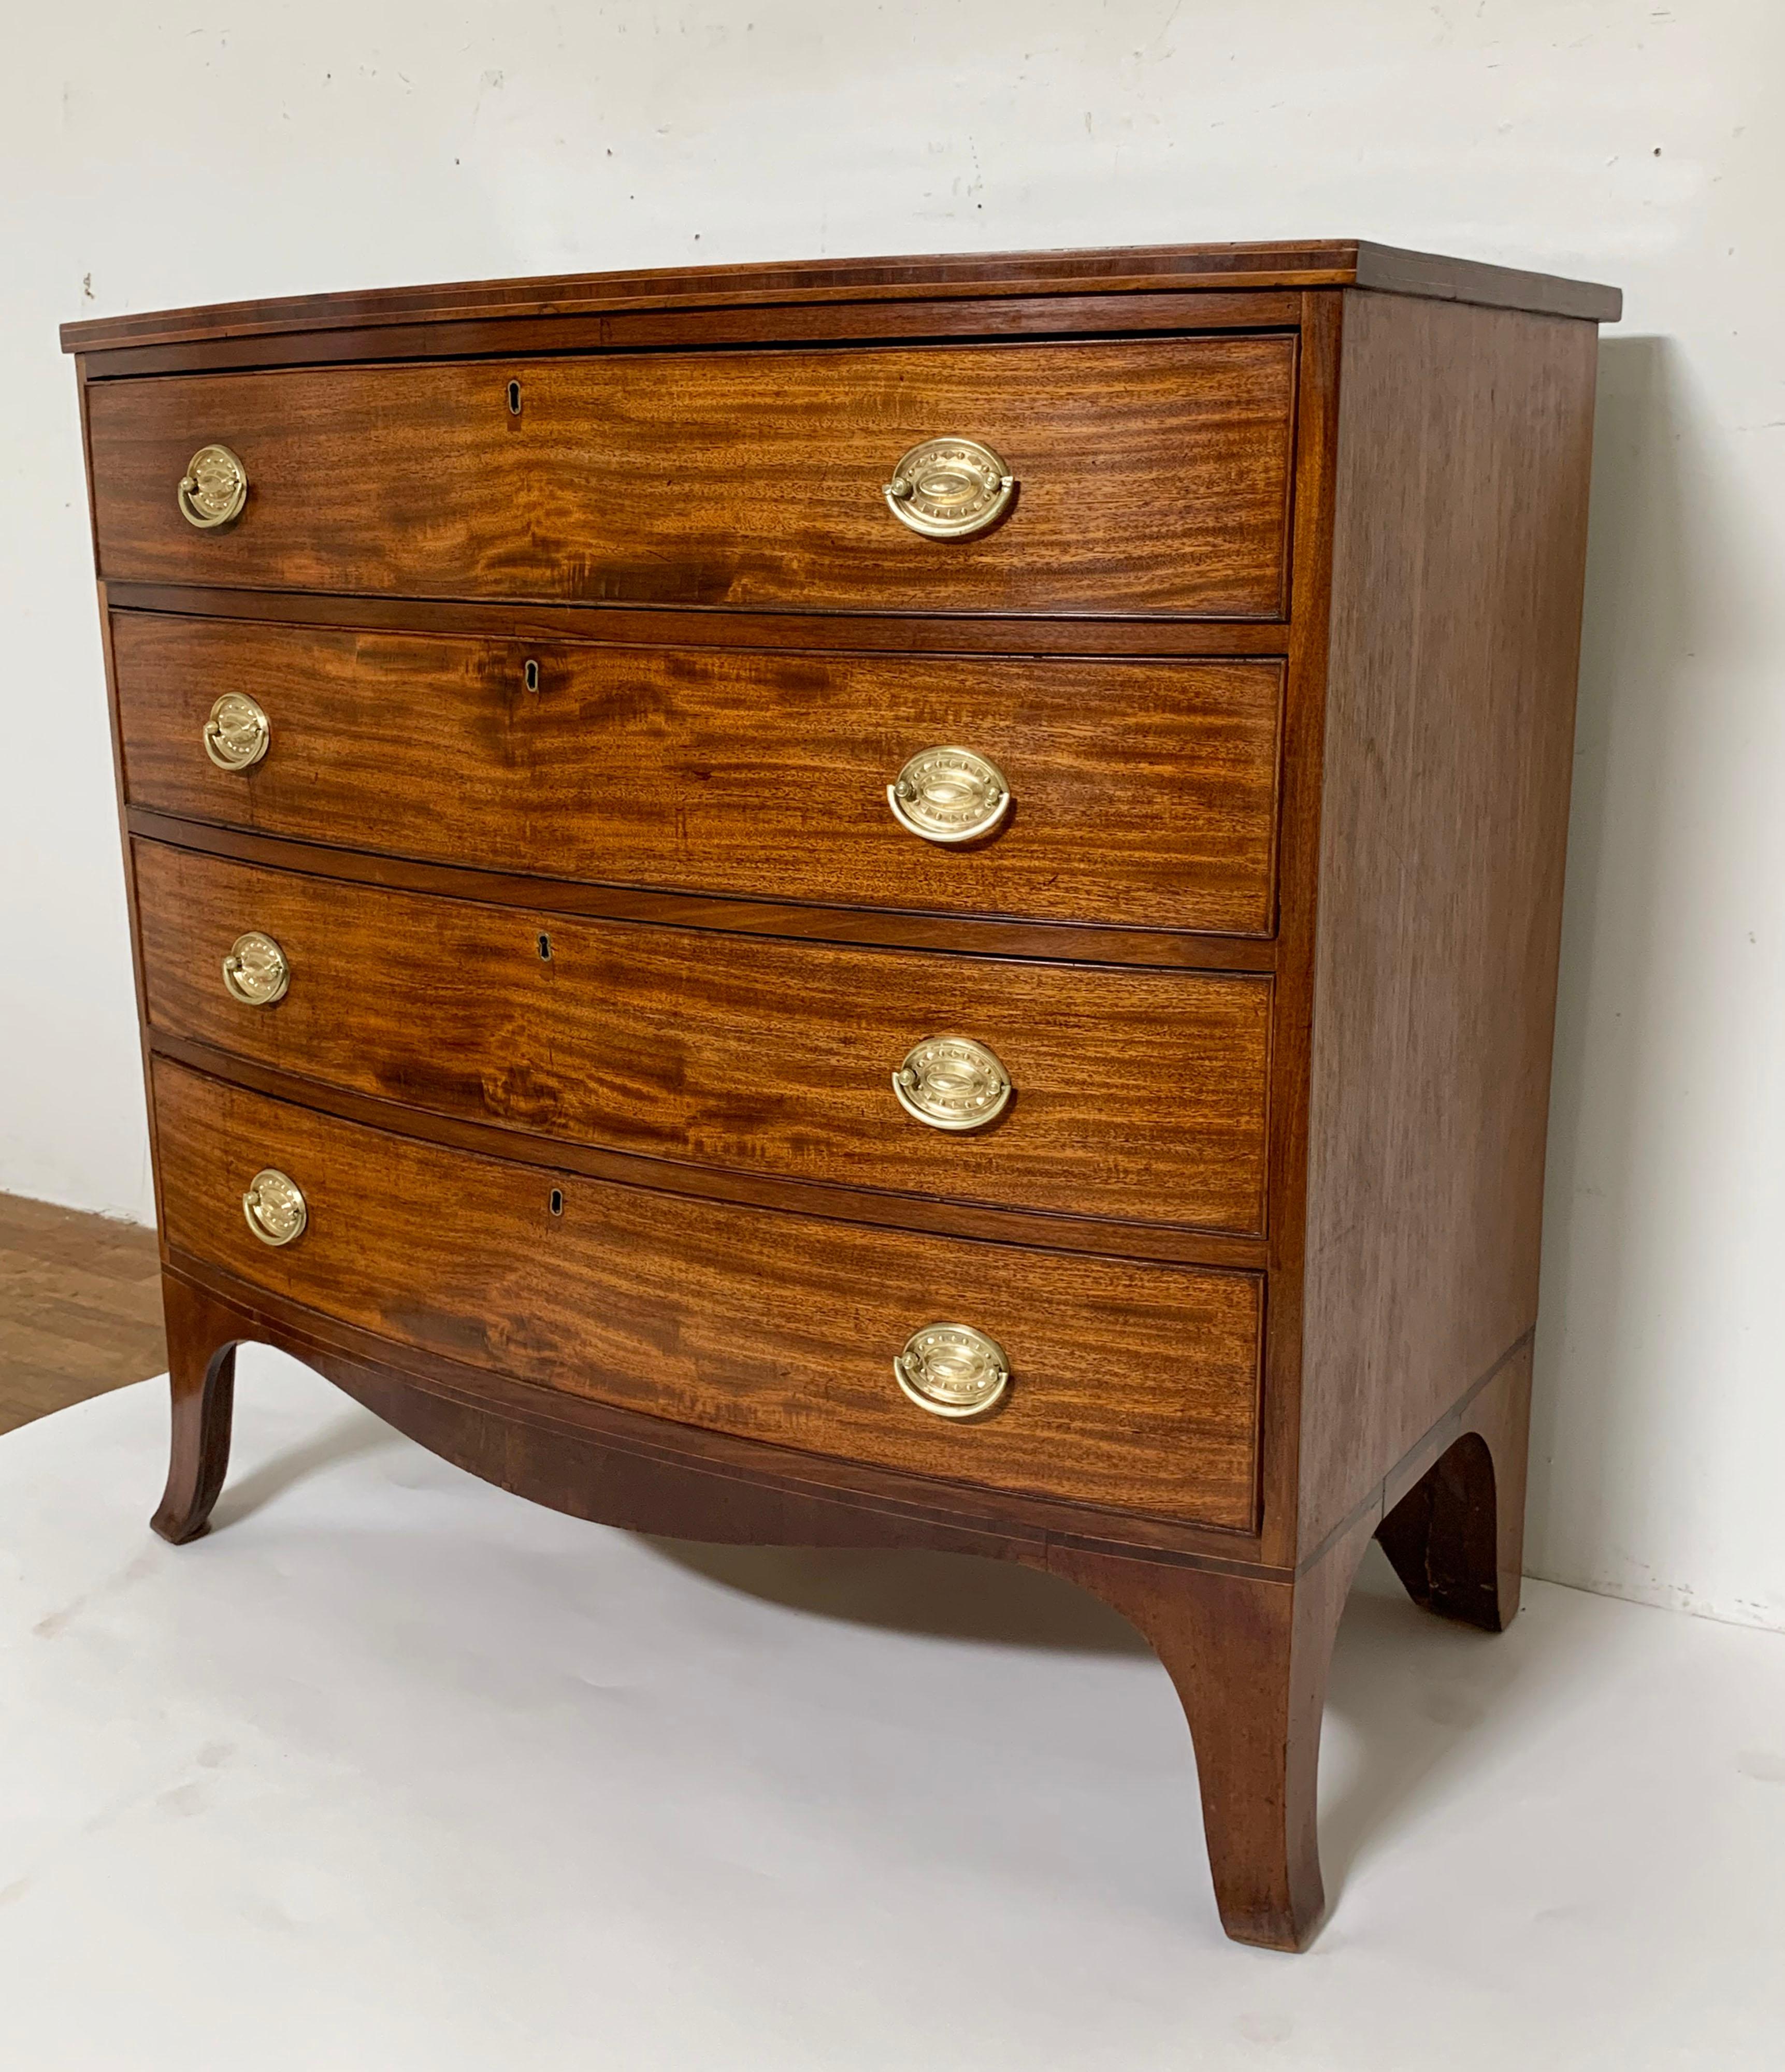 A mahogany four drawer swell front chest, American Federal era, circa 1810-1820, with original brass Hepplewhite pulls and serpentine skirt.
Measures 40.75